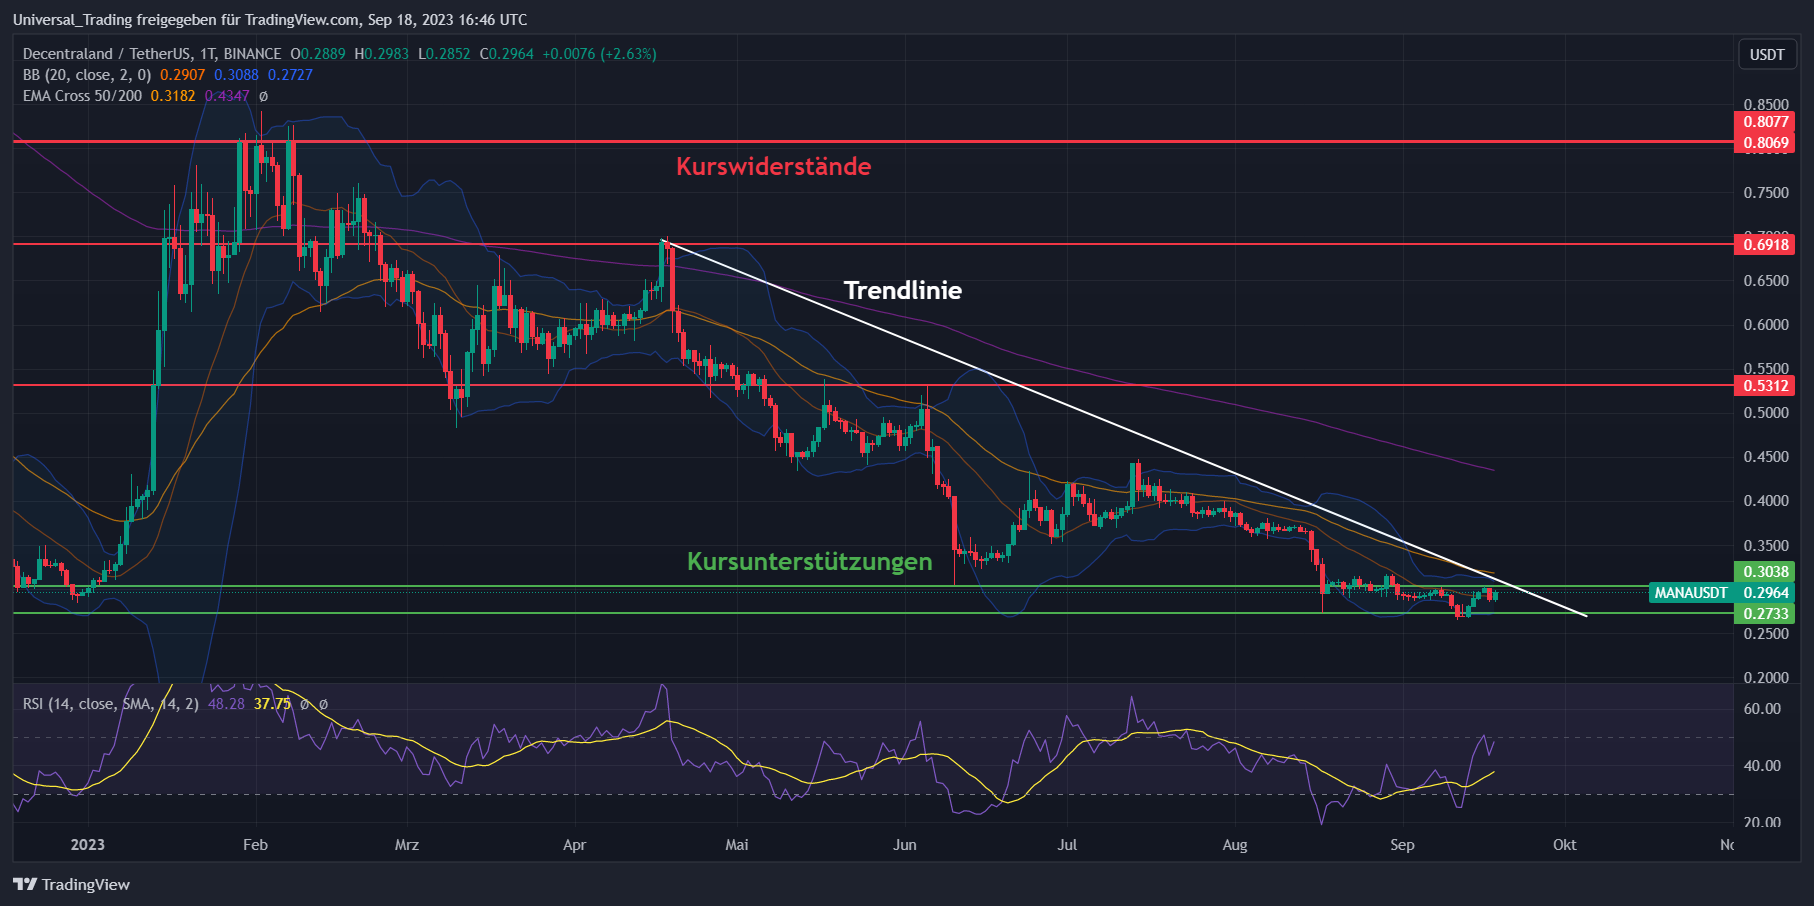 MANA-Kurs Chart in Tagesdarstellung (Quelle: Tradingview; Stand: 27.06.2023)